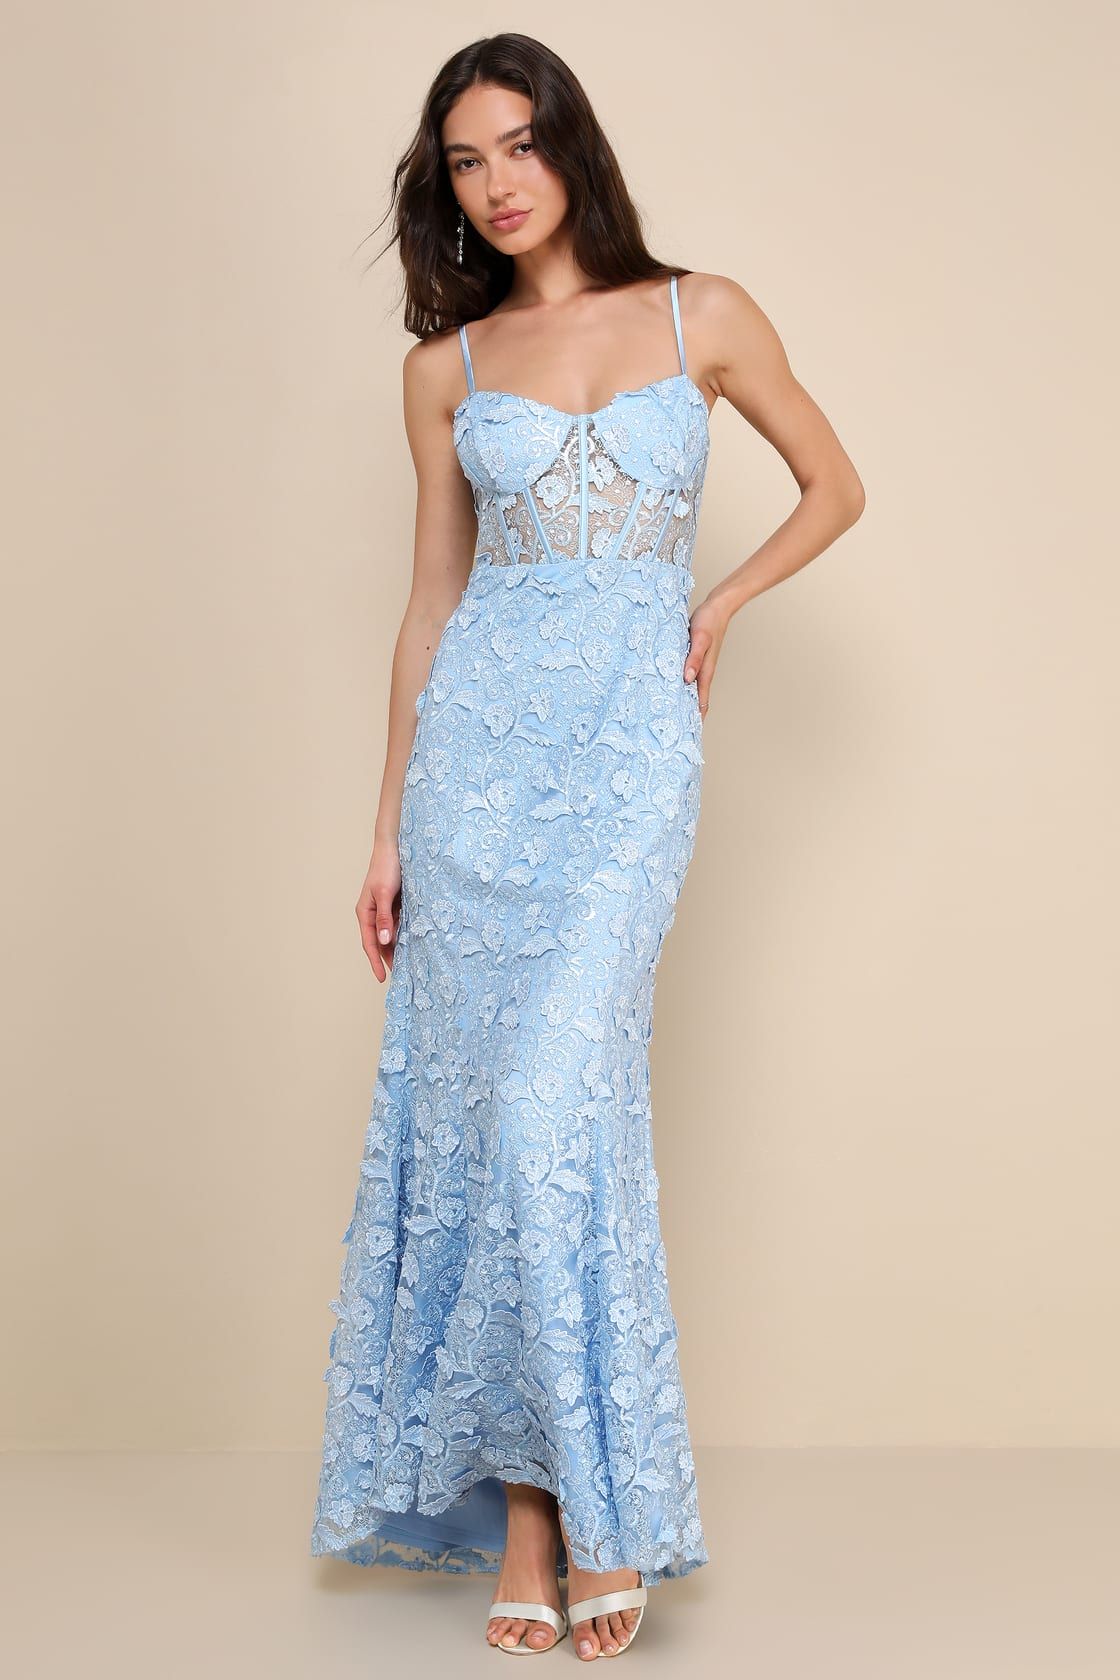 Exceptionally Radiant Blue Embroidered Floral Bustier Maxi Dress | Lulus